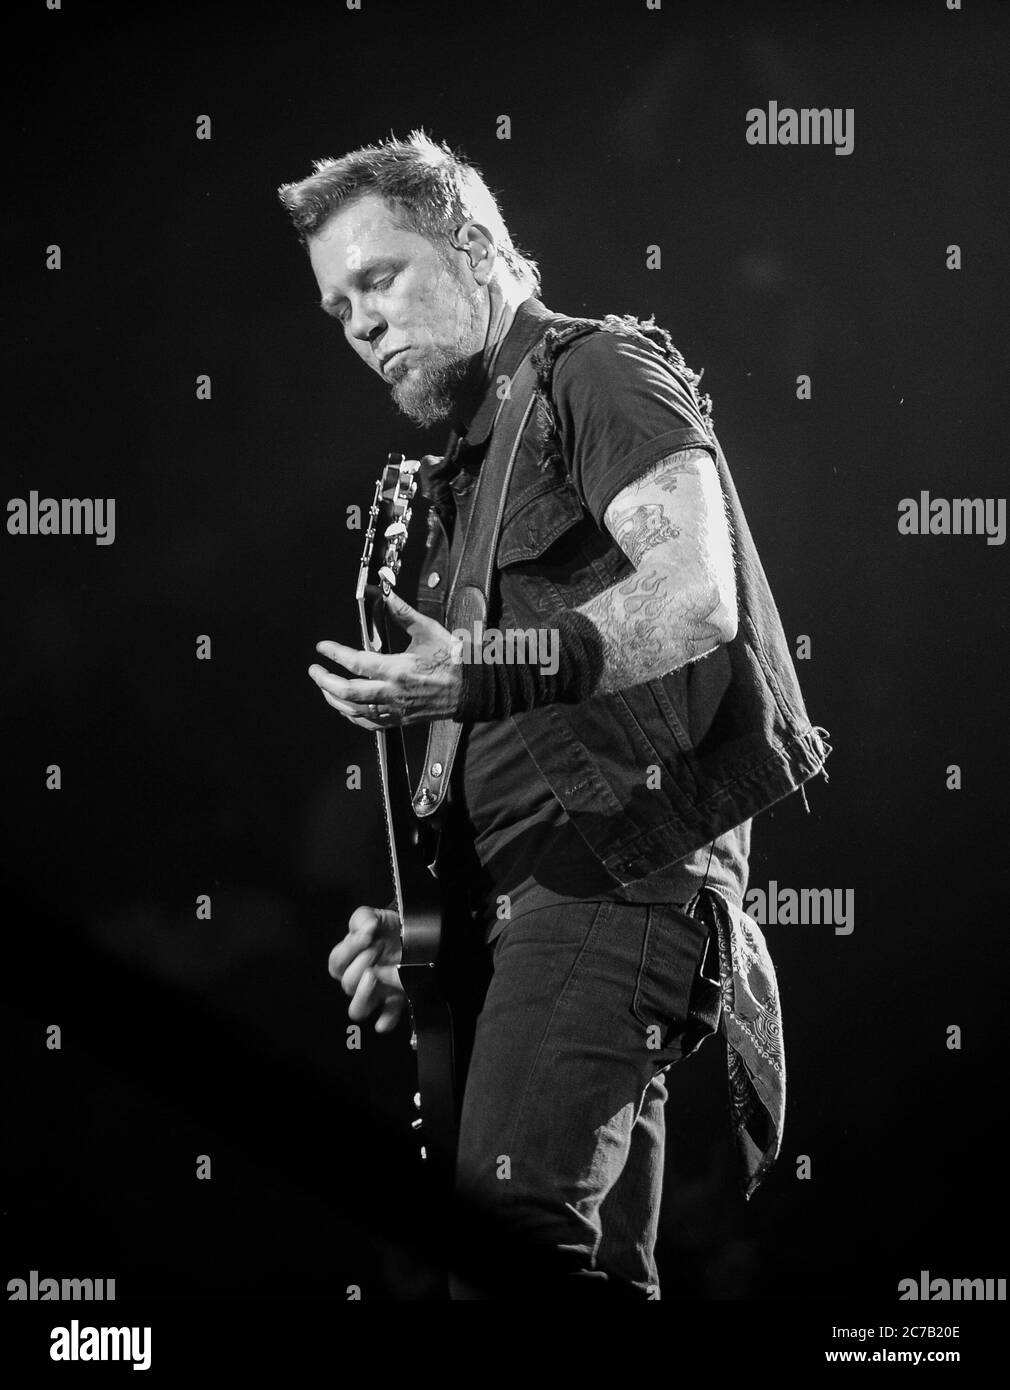 Singer James Hetfield of Metallica performs at the Ontario Citizens Business Bank Arena in Ontario. Credit: Jared Milgrim/The Photo Access Stock Photo